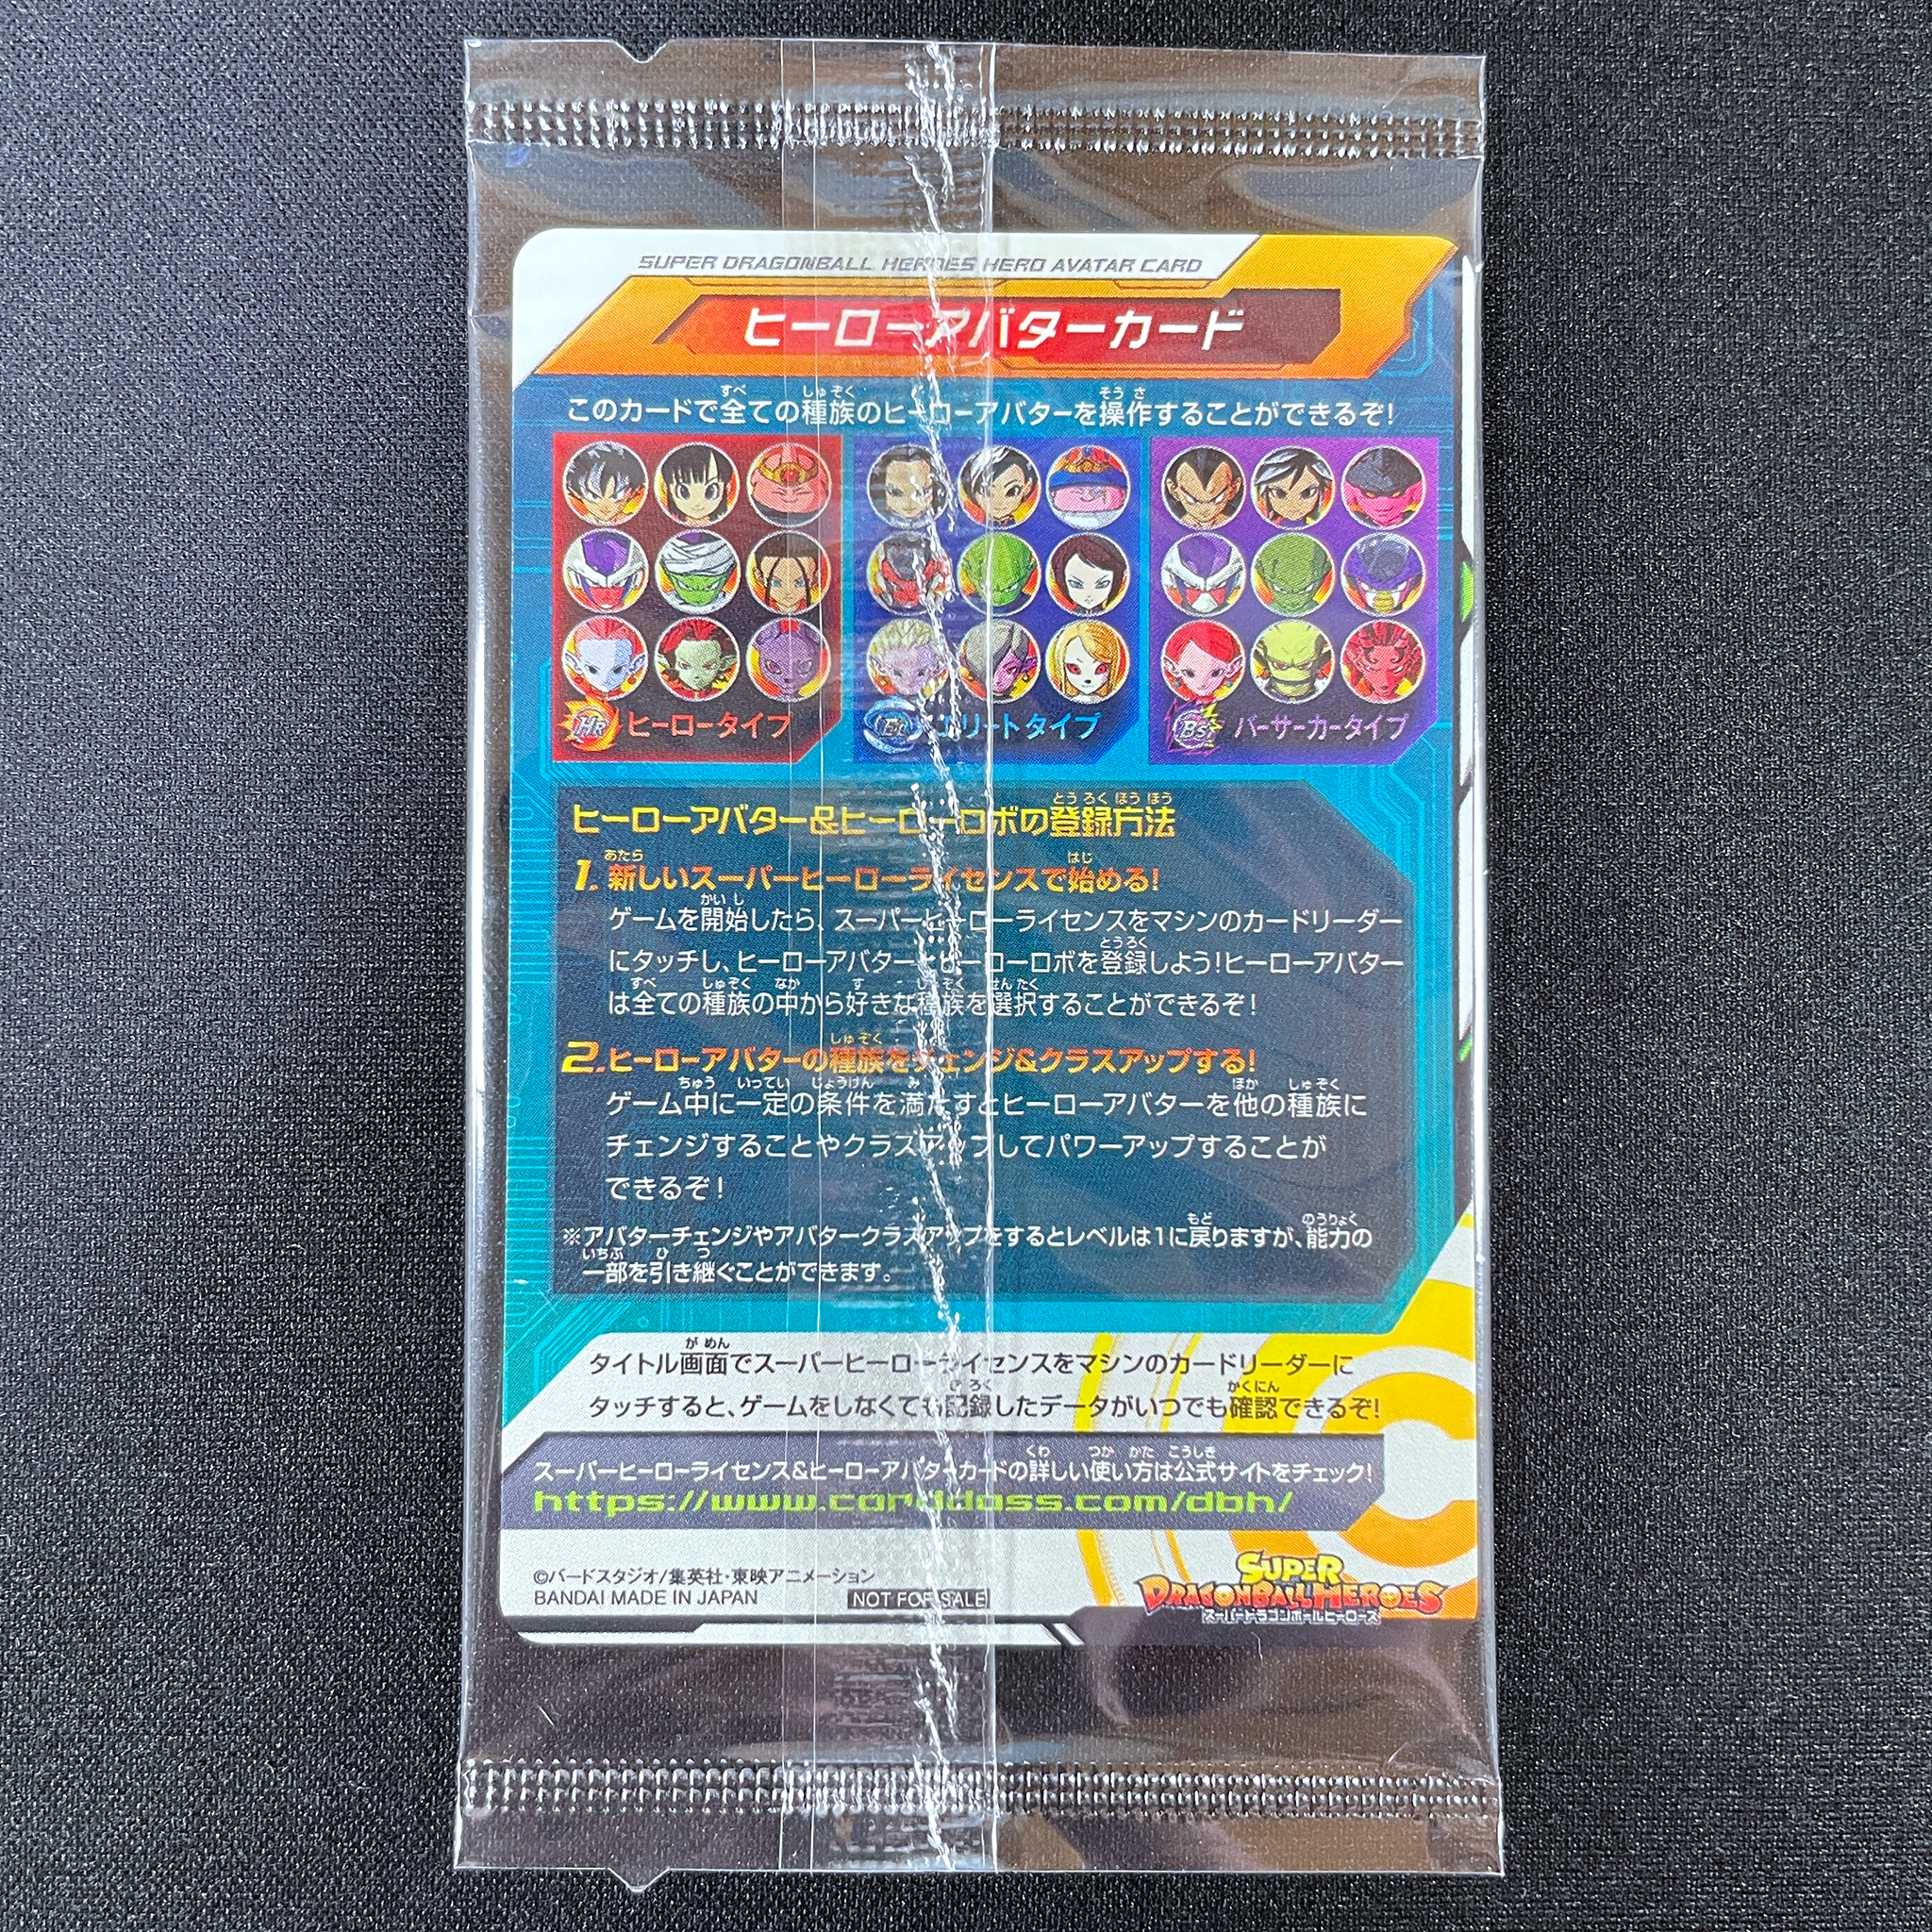 SUPER DRAGON BALL HEROES ULTRA GOD MISSION HERO AVATAR CARD in blister